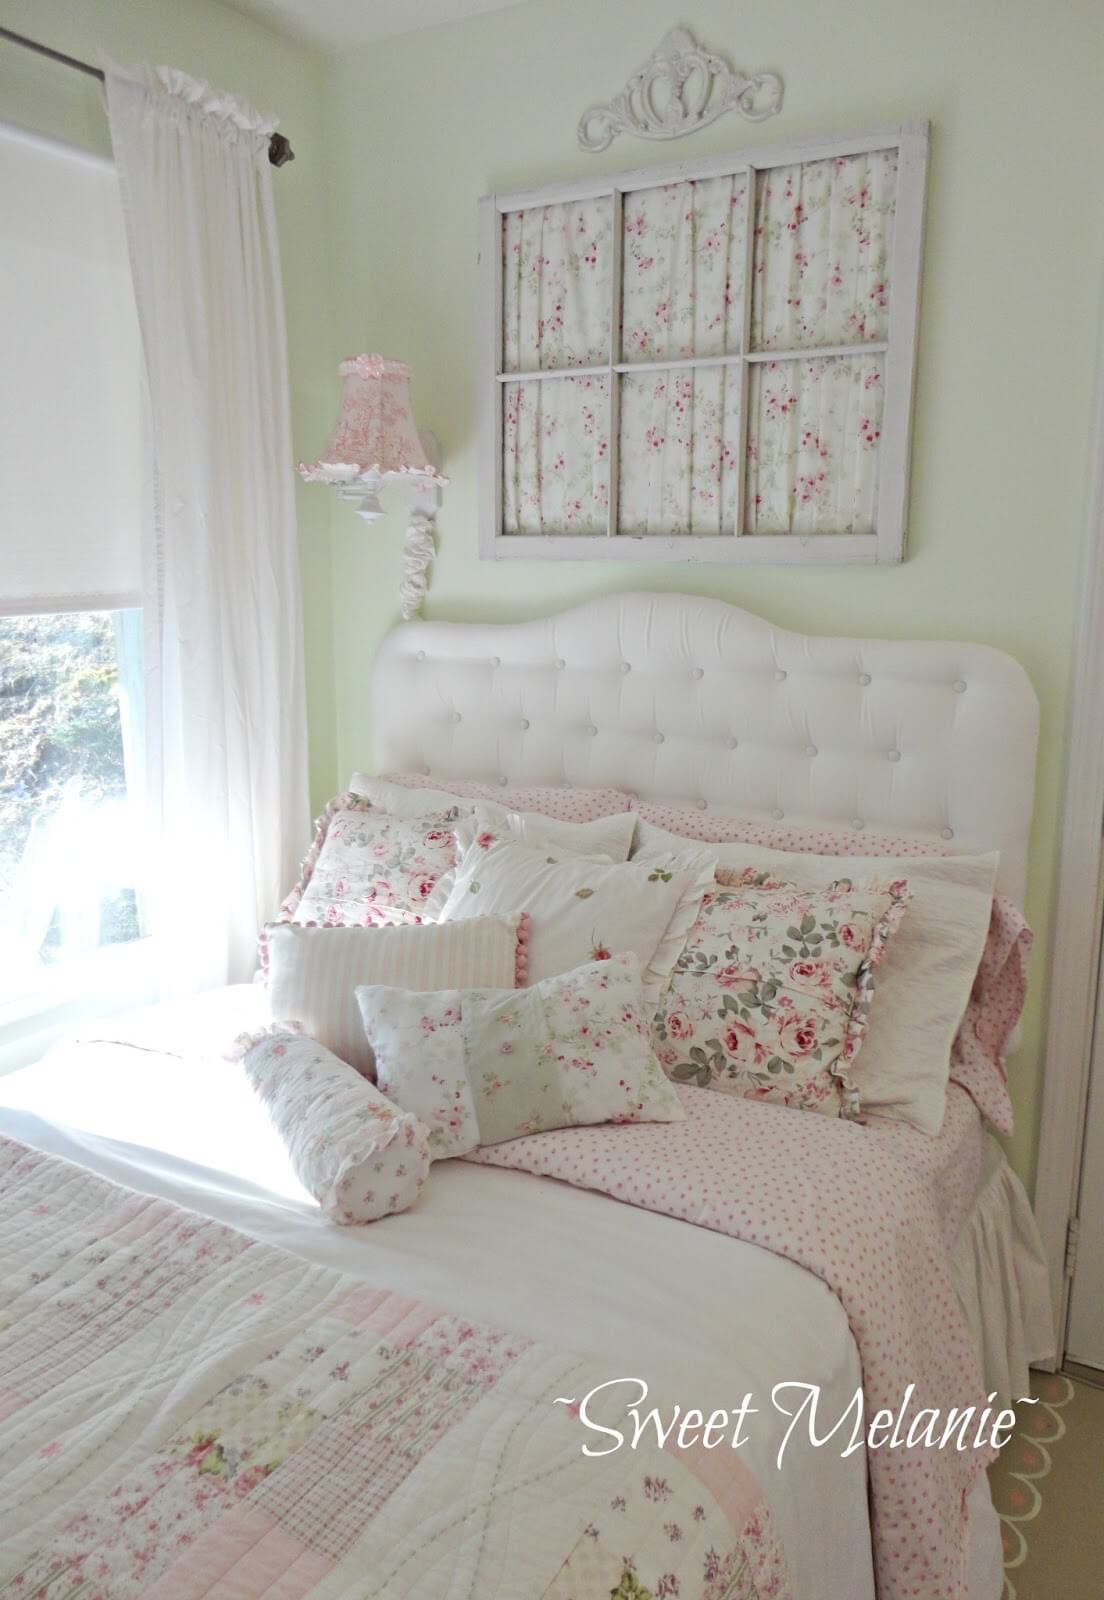 White Shabby Chic Bedroom
 35 Best Shabby Chic Bedroom Design and Decor Ideas for 2017